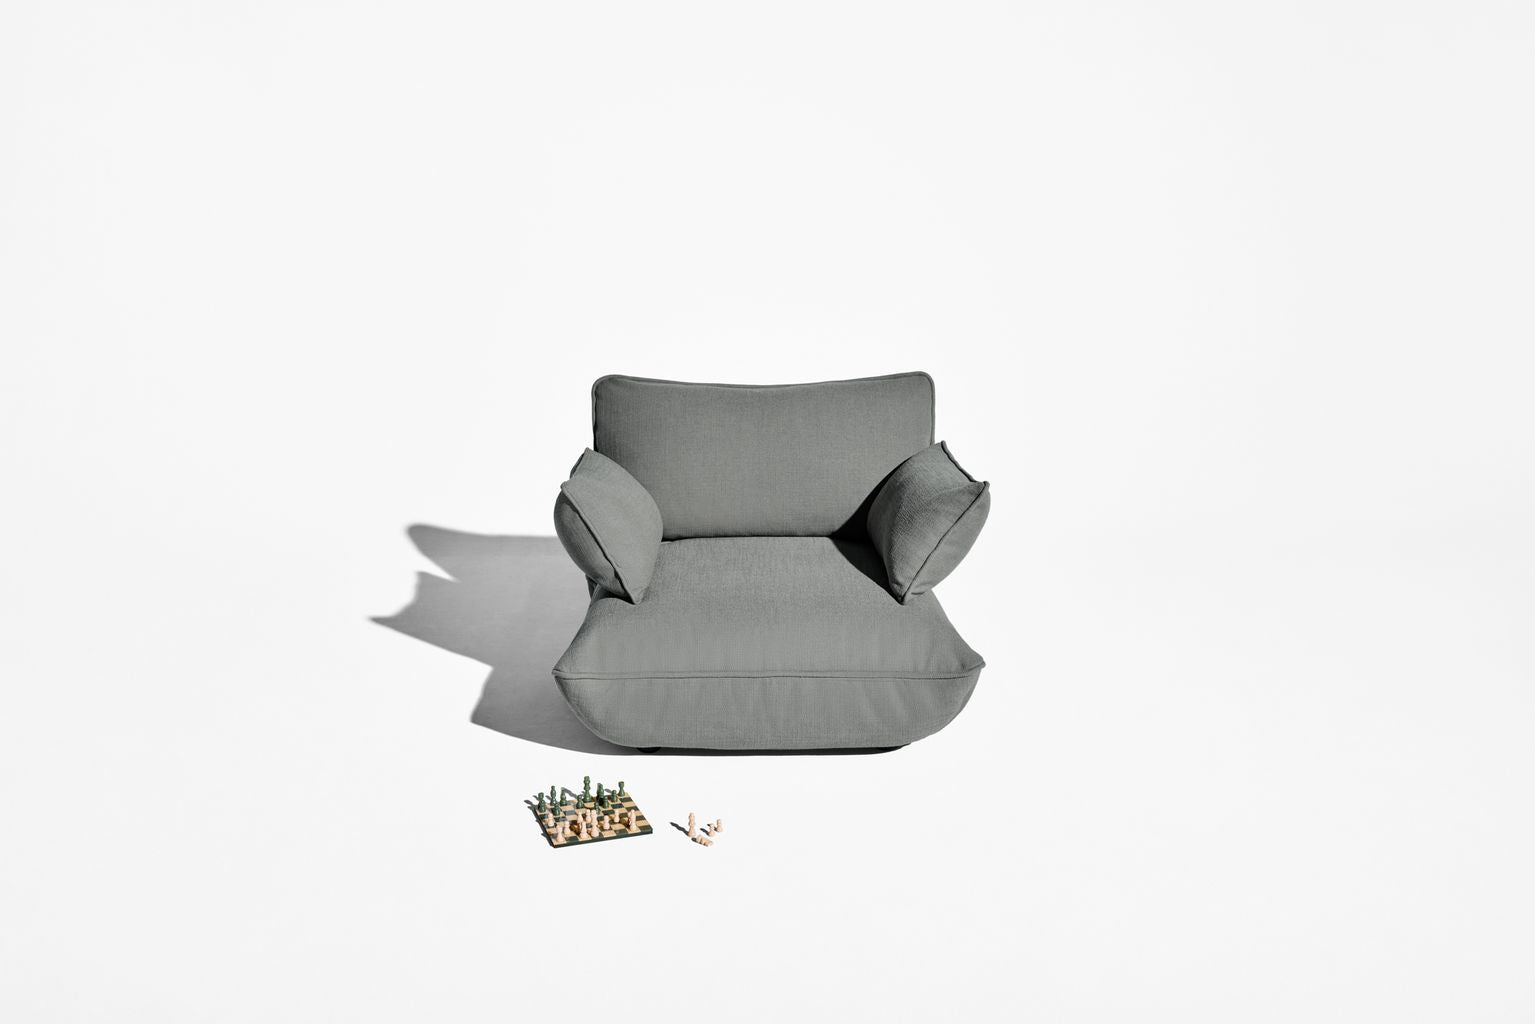 Fatboy Sumo Loveseat, Mouse Grey